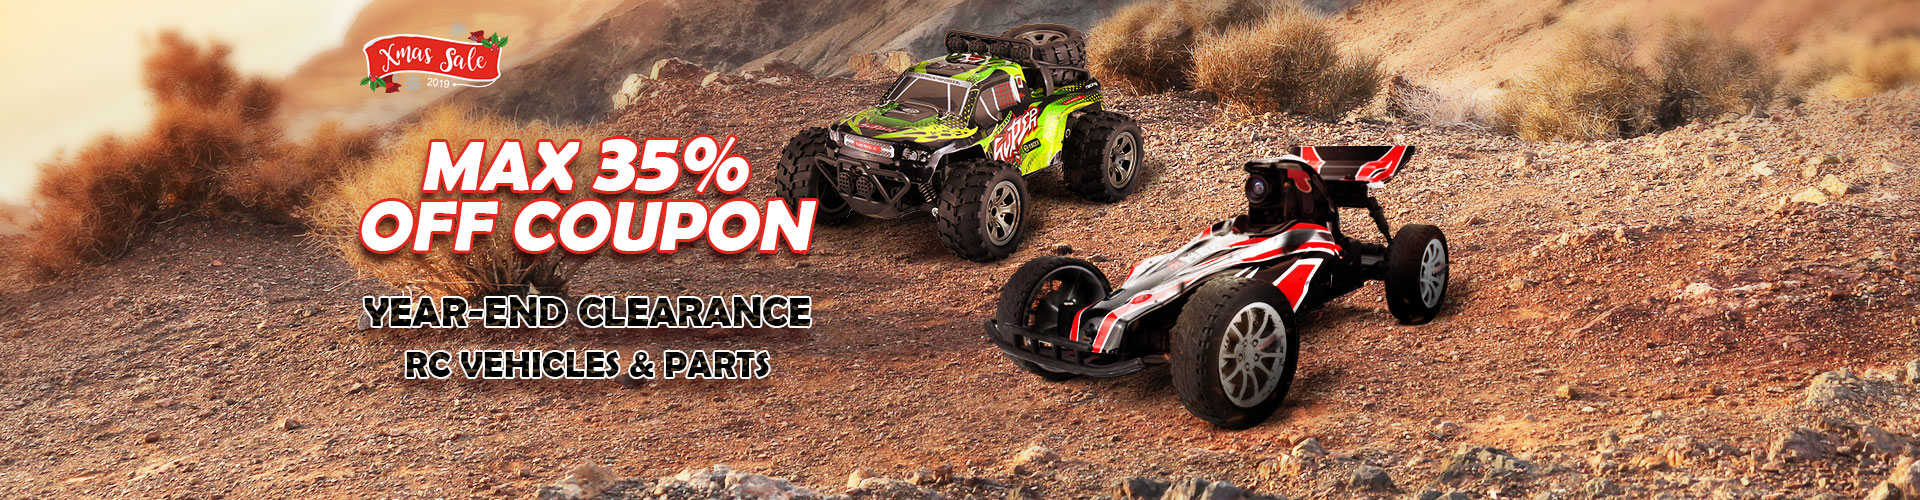 MAX 35% COUPON YEAR-END CLEARANCE RC Vehicles & Parts